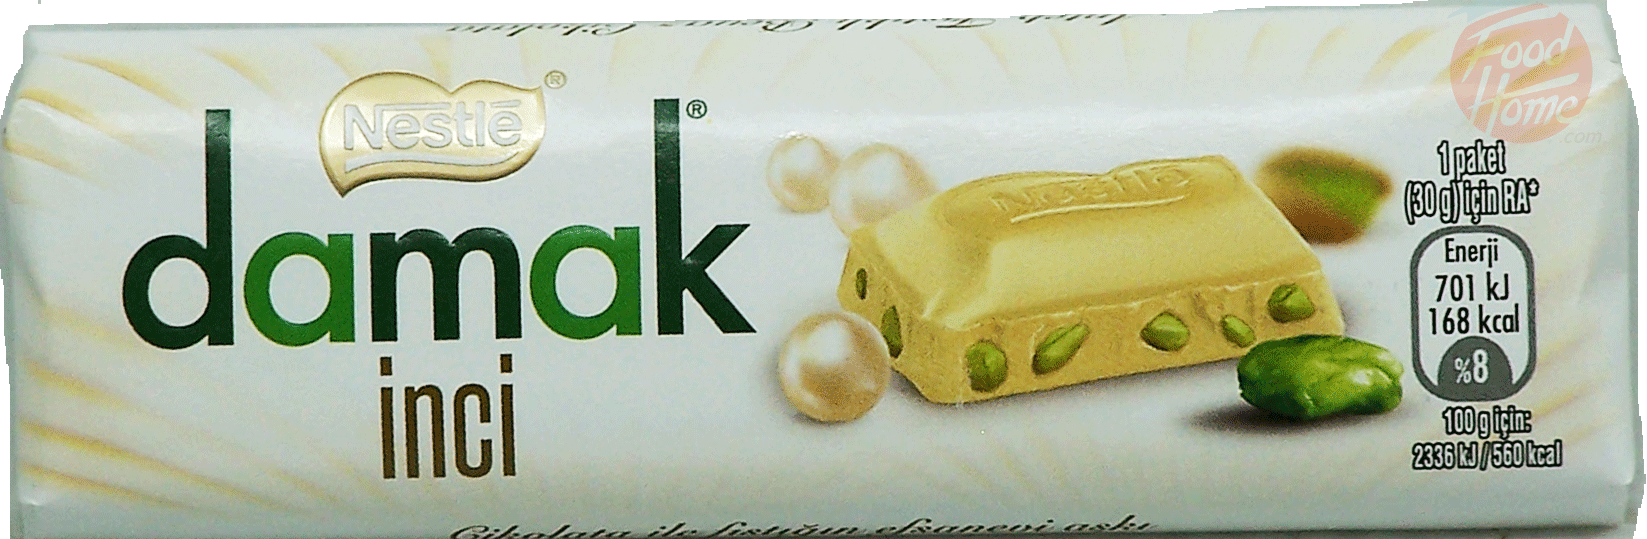 Nestle damak inci white chocolate mini candy bar with nuts, 100-gram in wrapper (case of 12)